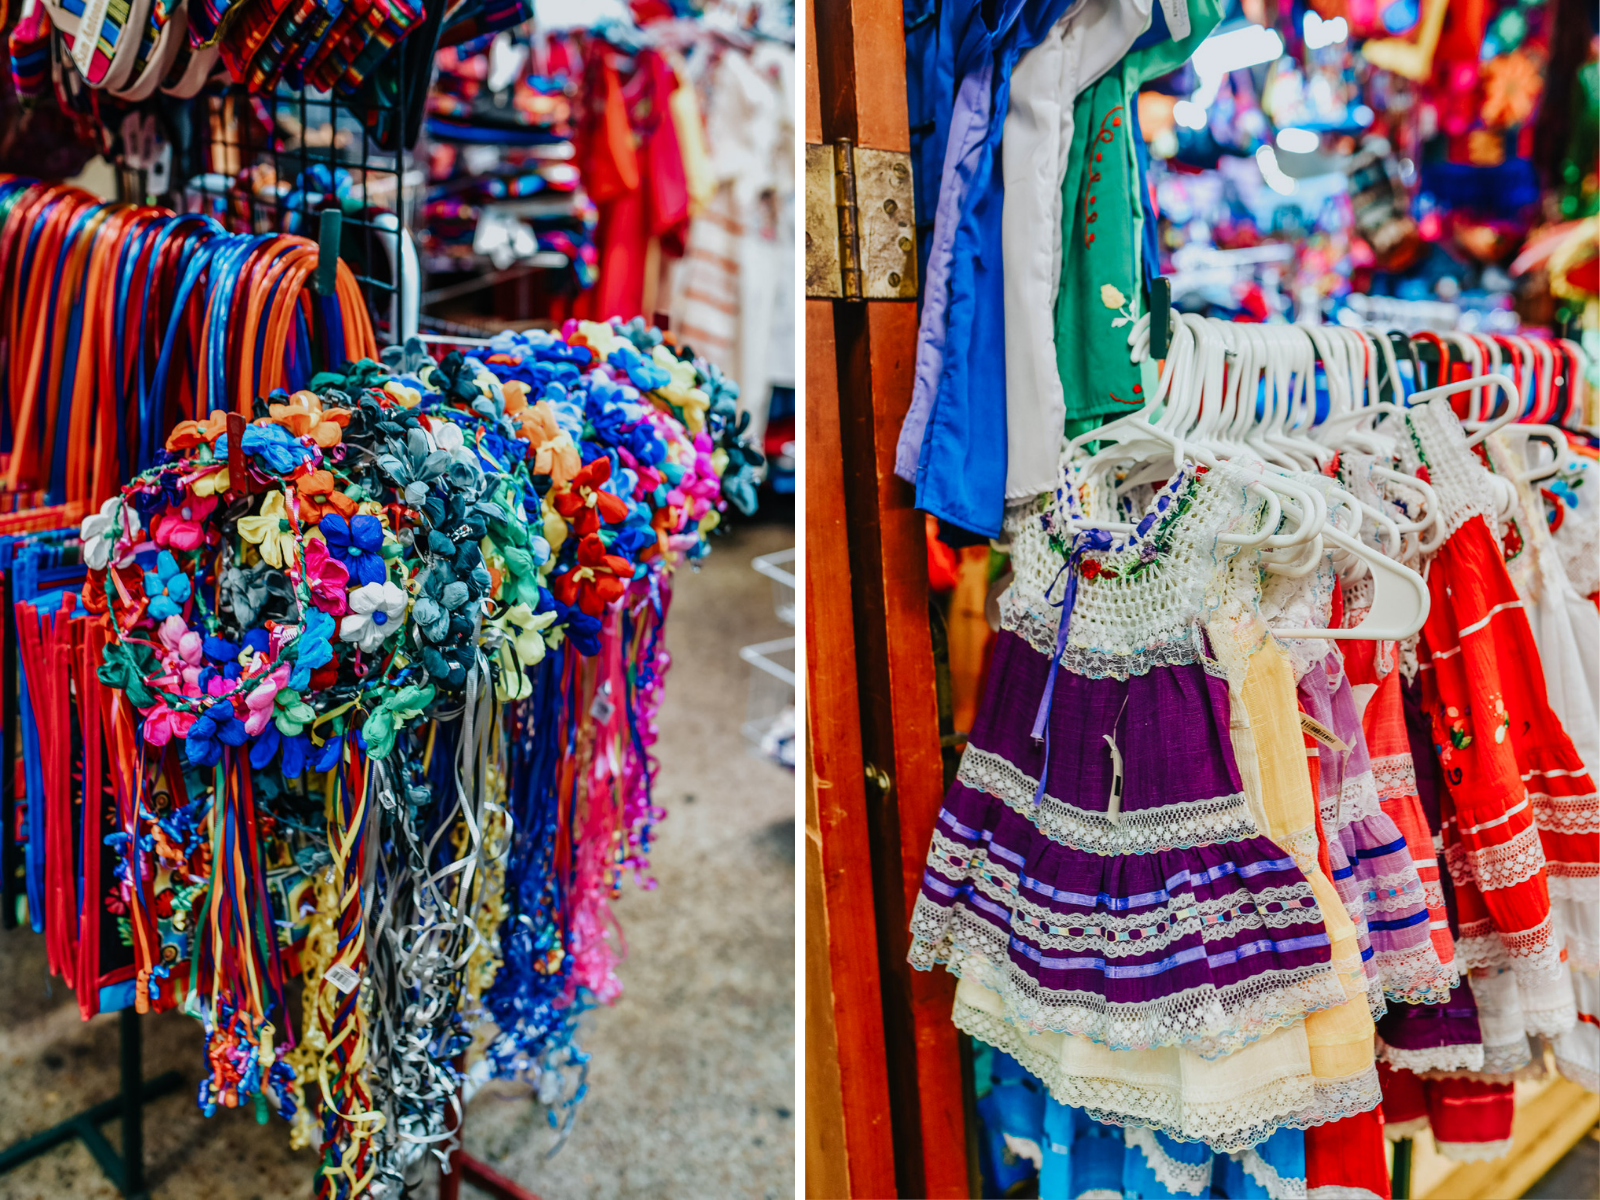 Top 10 Kid Friendly Activities in San Antonio by popular Texas travel blog, Lone Star Looking Glass: image of faux floral crowns and Mexican dresses at the Historic Market Square.